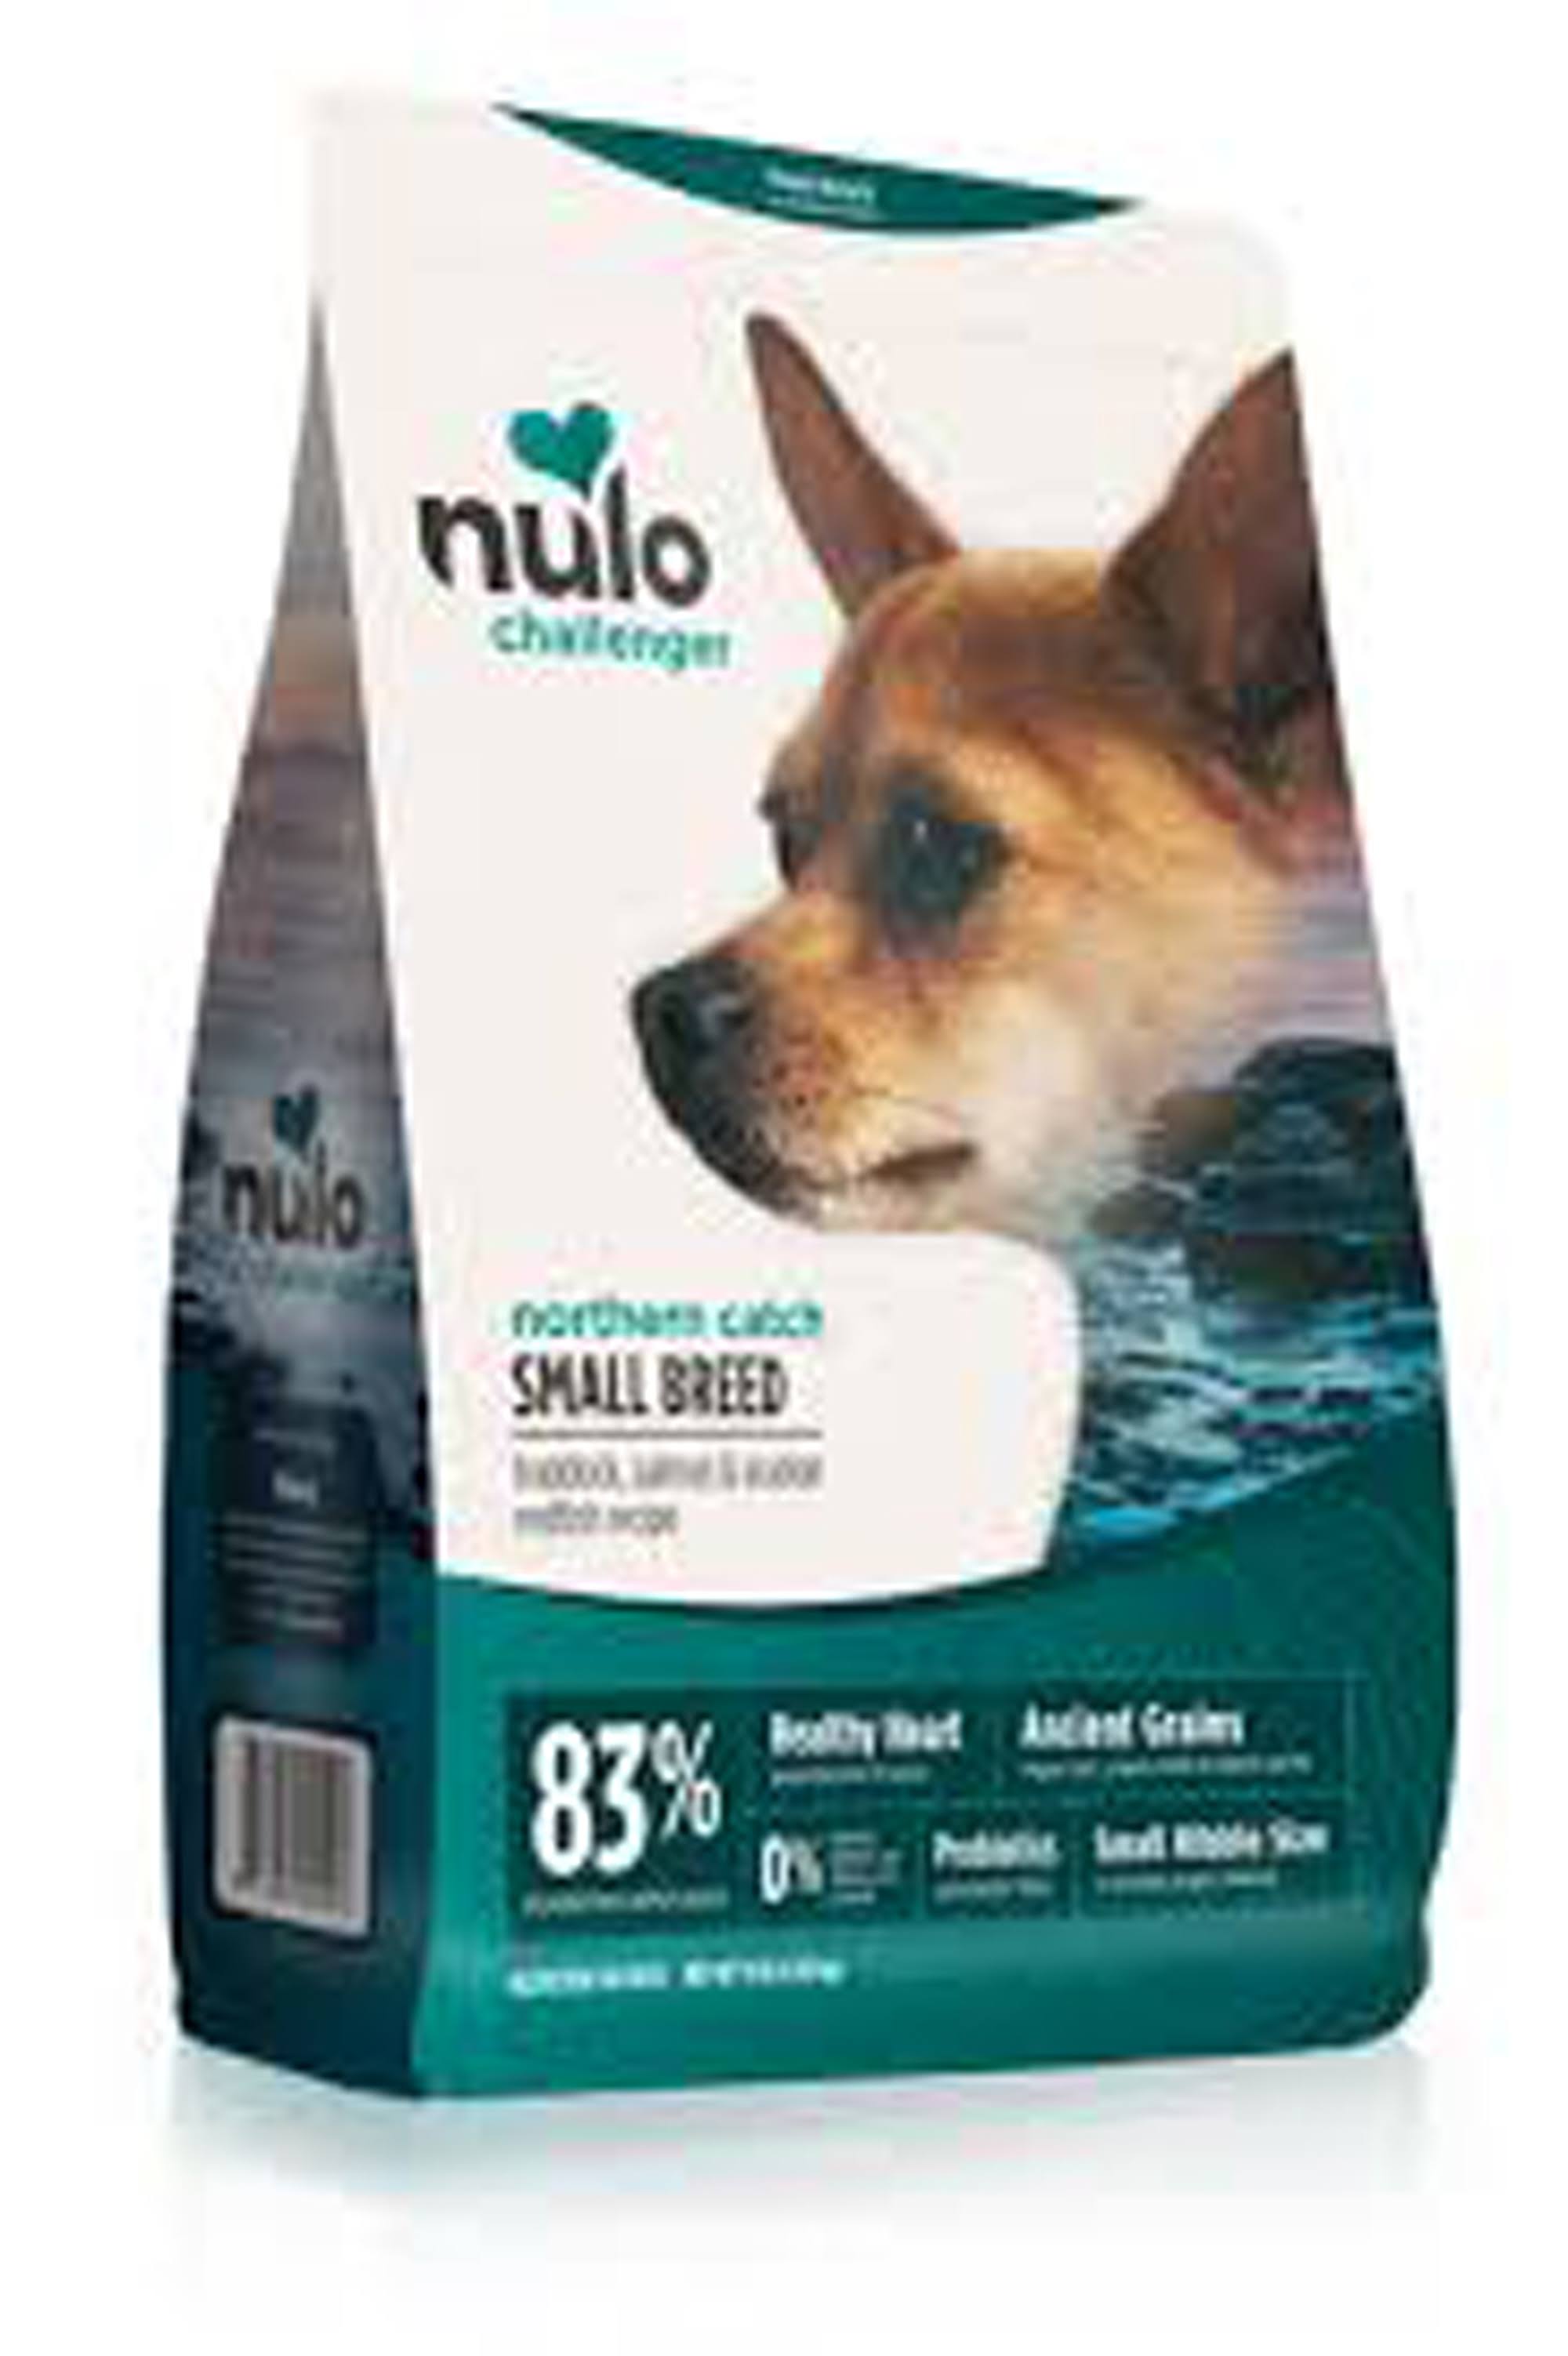 Nulo Challenger Northern Catch Small Breed Haddock, Salmon & Redfish Dry Dog Food, 11 Pounds